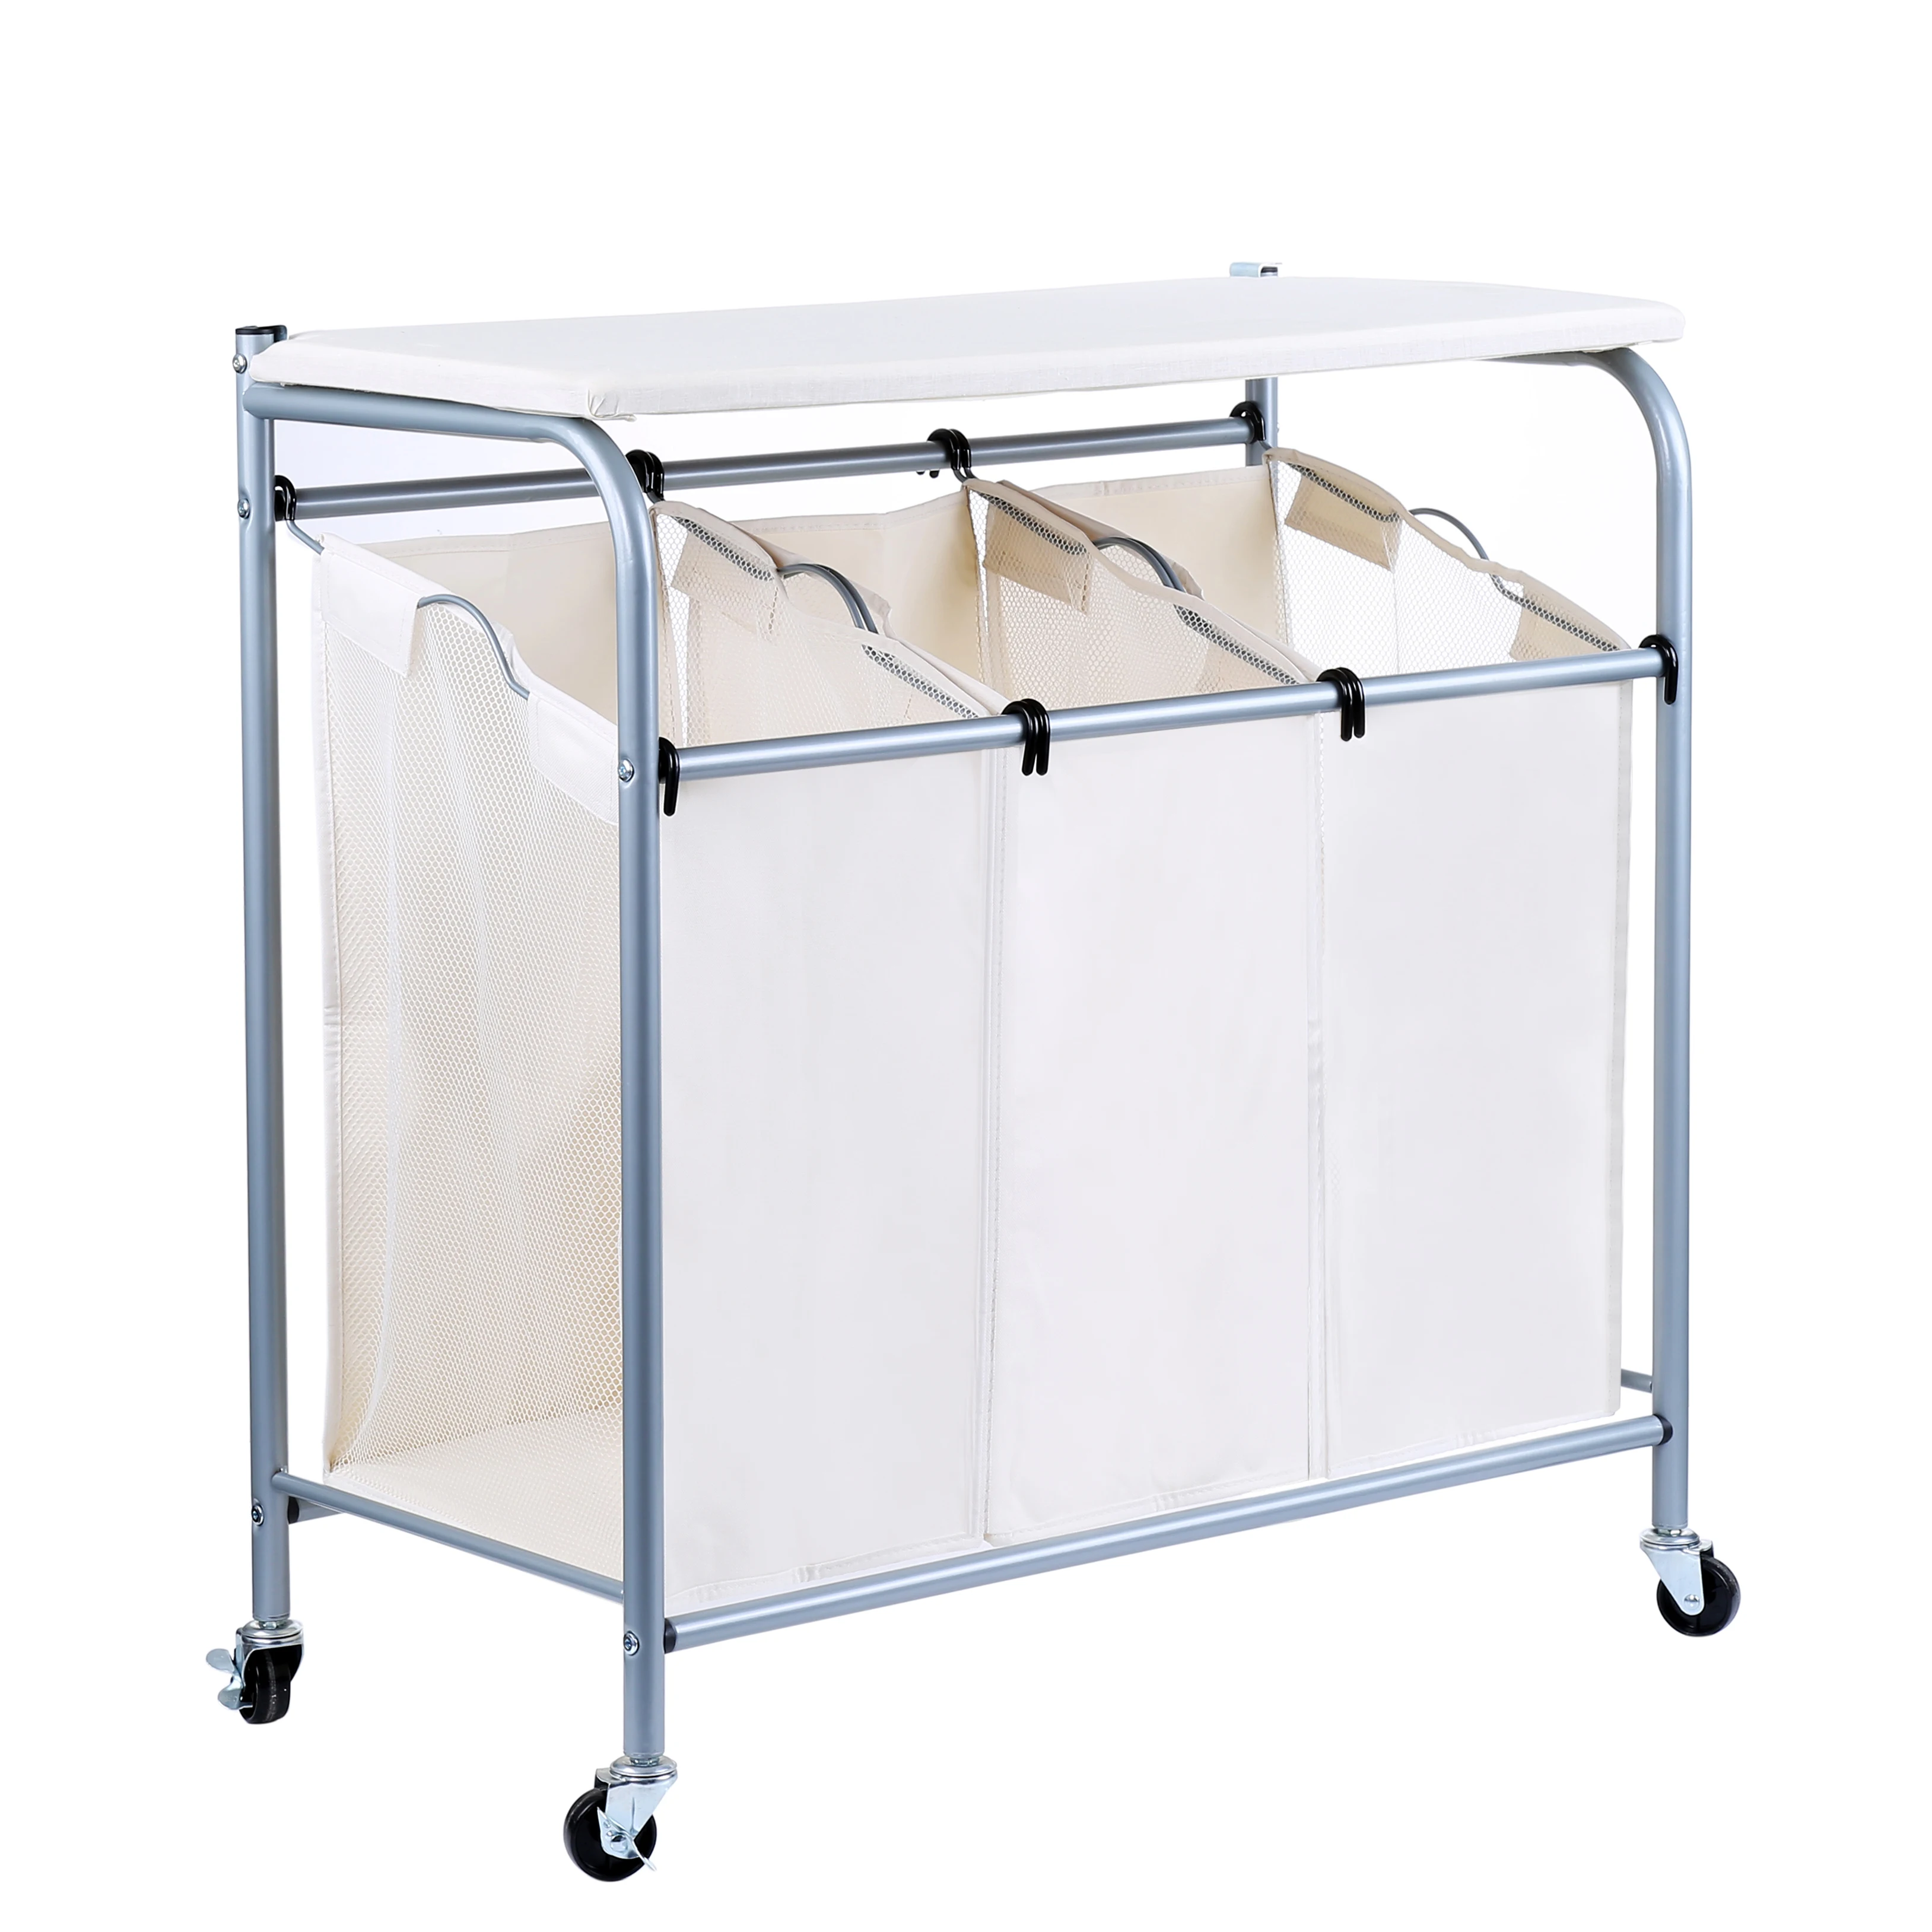 

Classic Rolling Laundry Sorter Cart Heavy Duty 3 Bags Laundry hamper with Ironing Board, Beige, or grey, or others